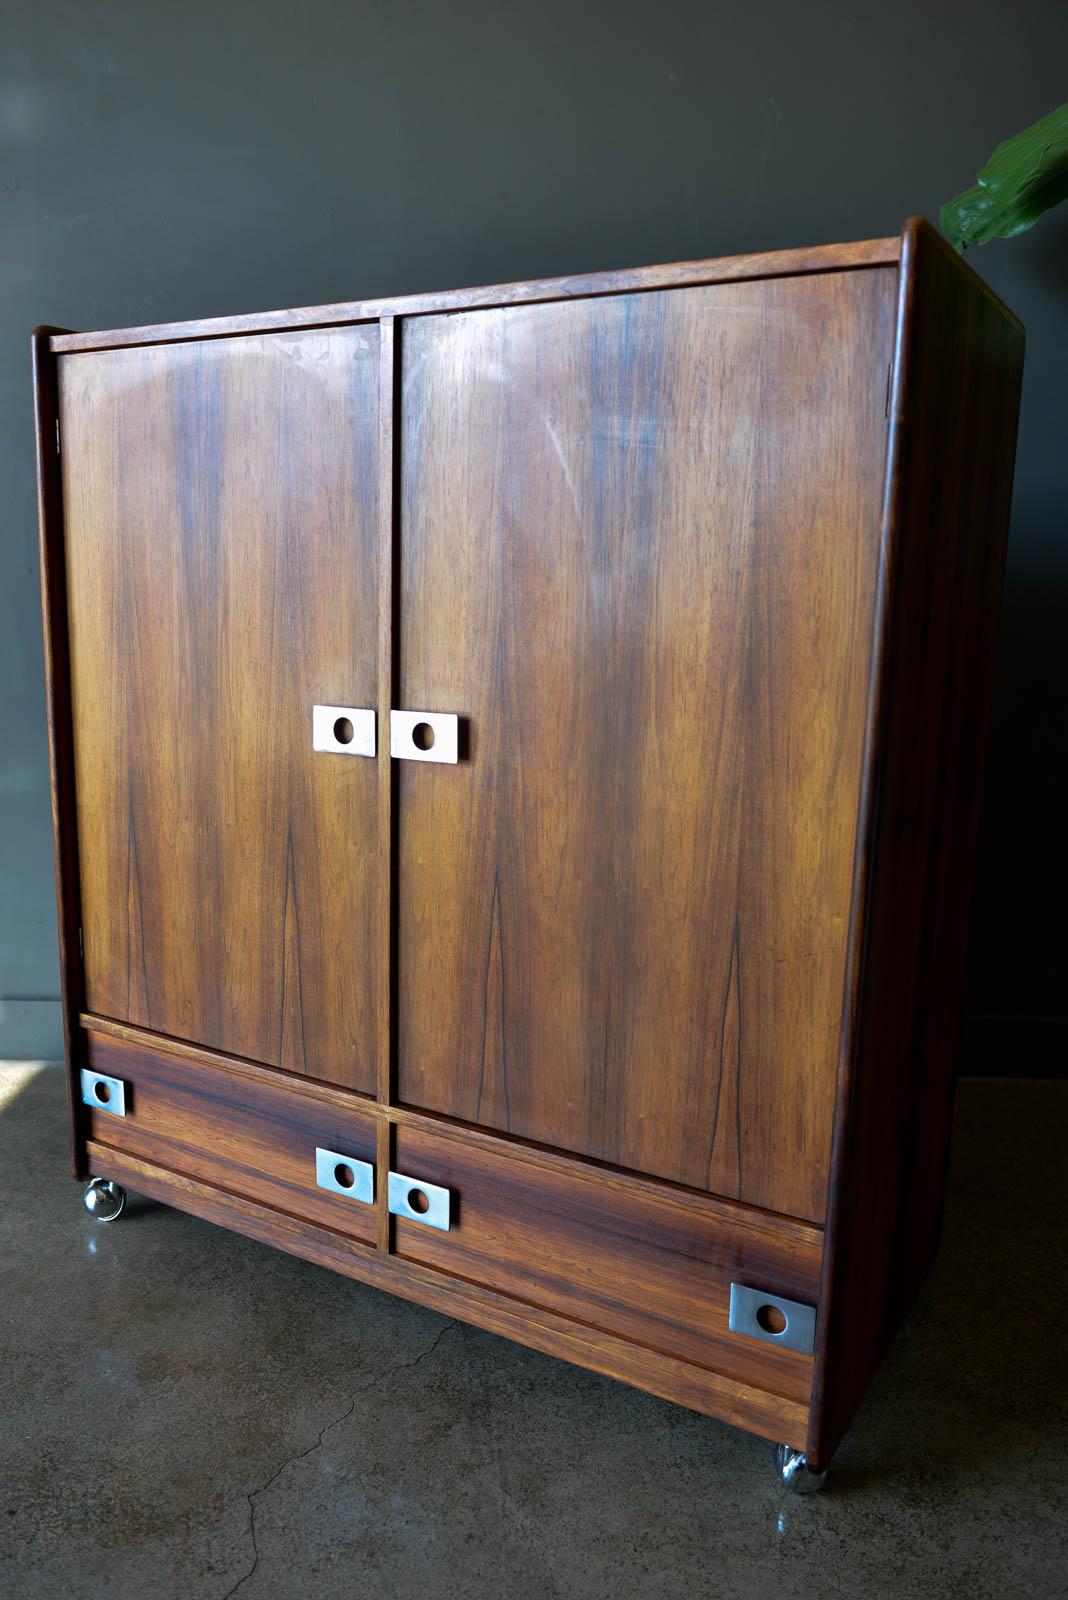 Rosewood and chrome rolling dry bar or cabinet by Leif Jacobsen, circa 1970. Beautiful grained rosewood with polished chrome hardware and casters. Could be used as a dry bar as well as for clothing/storage as a cabinet. Very good original condition